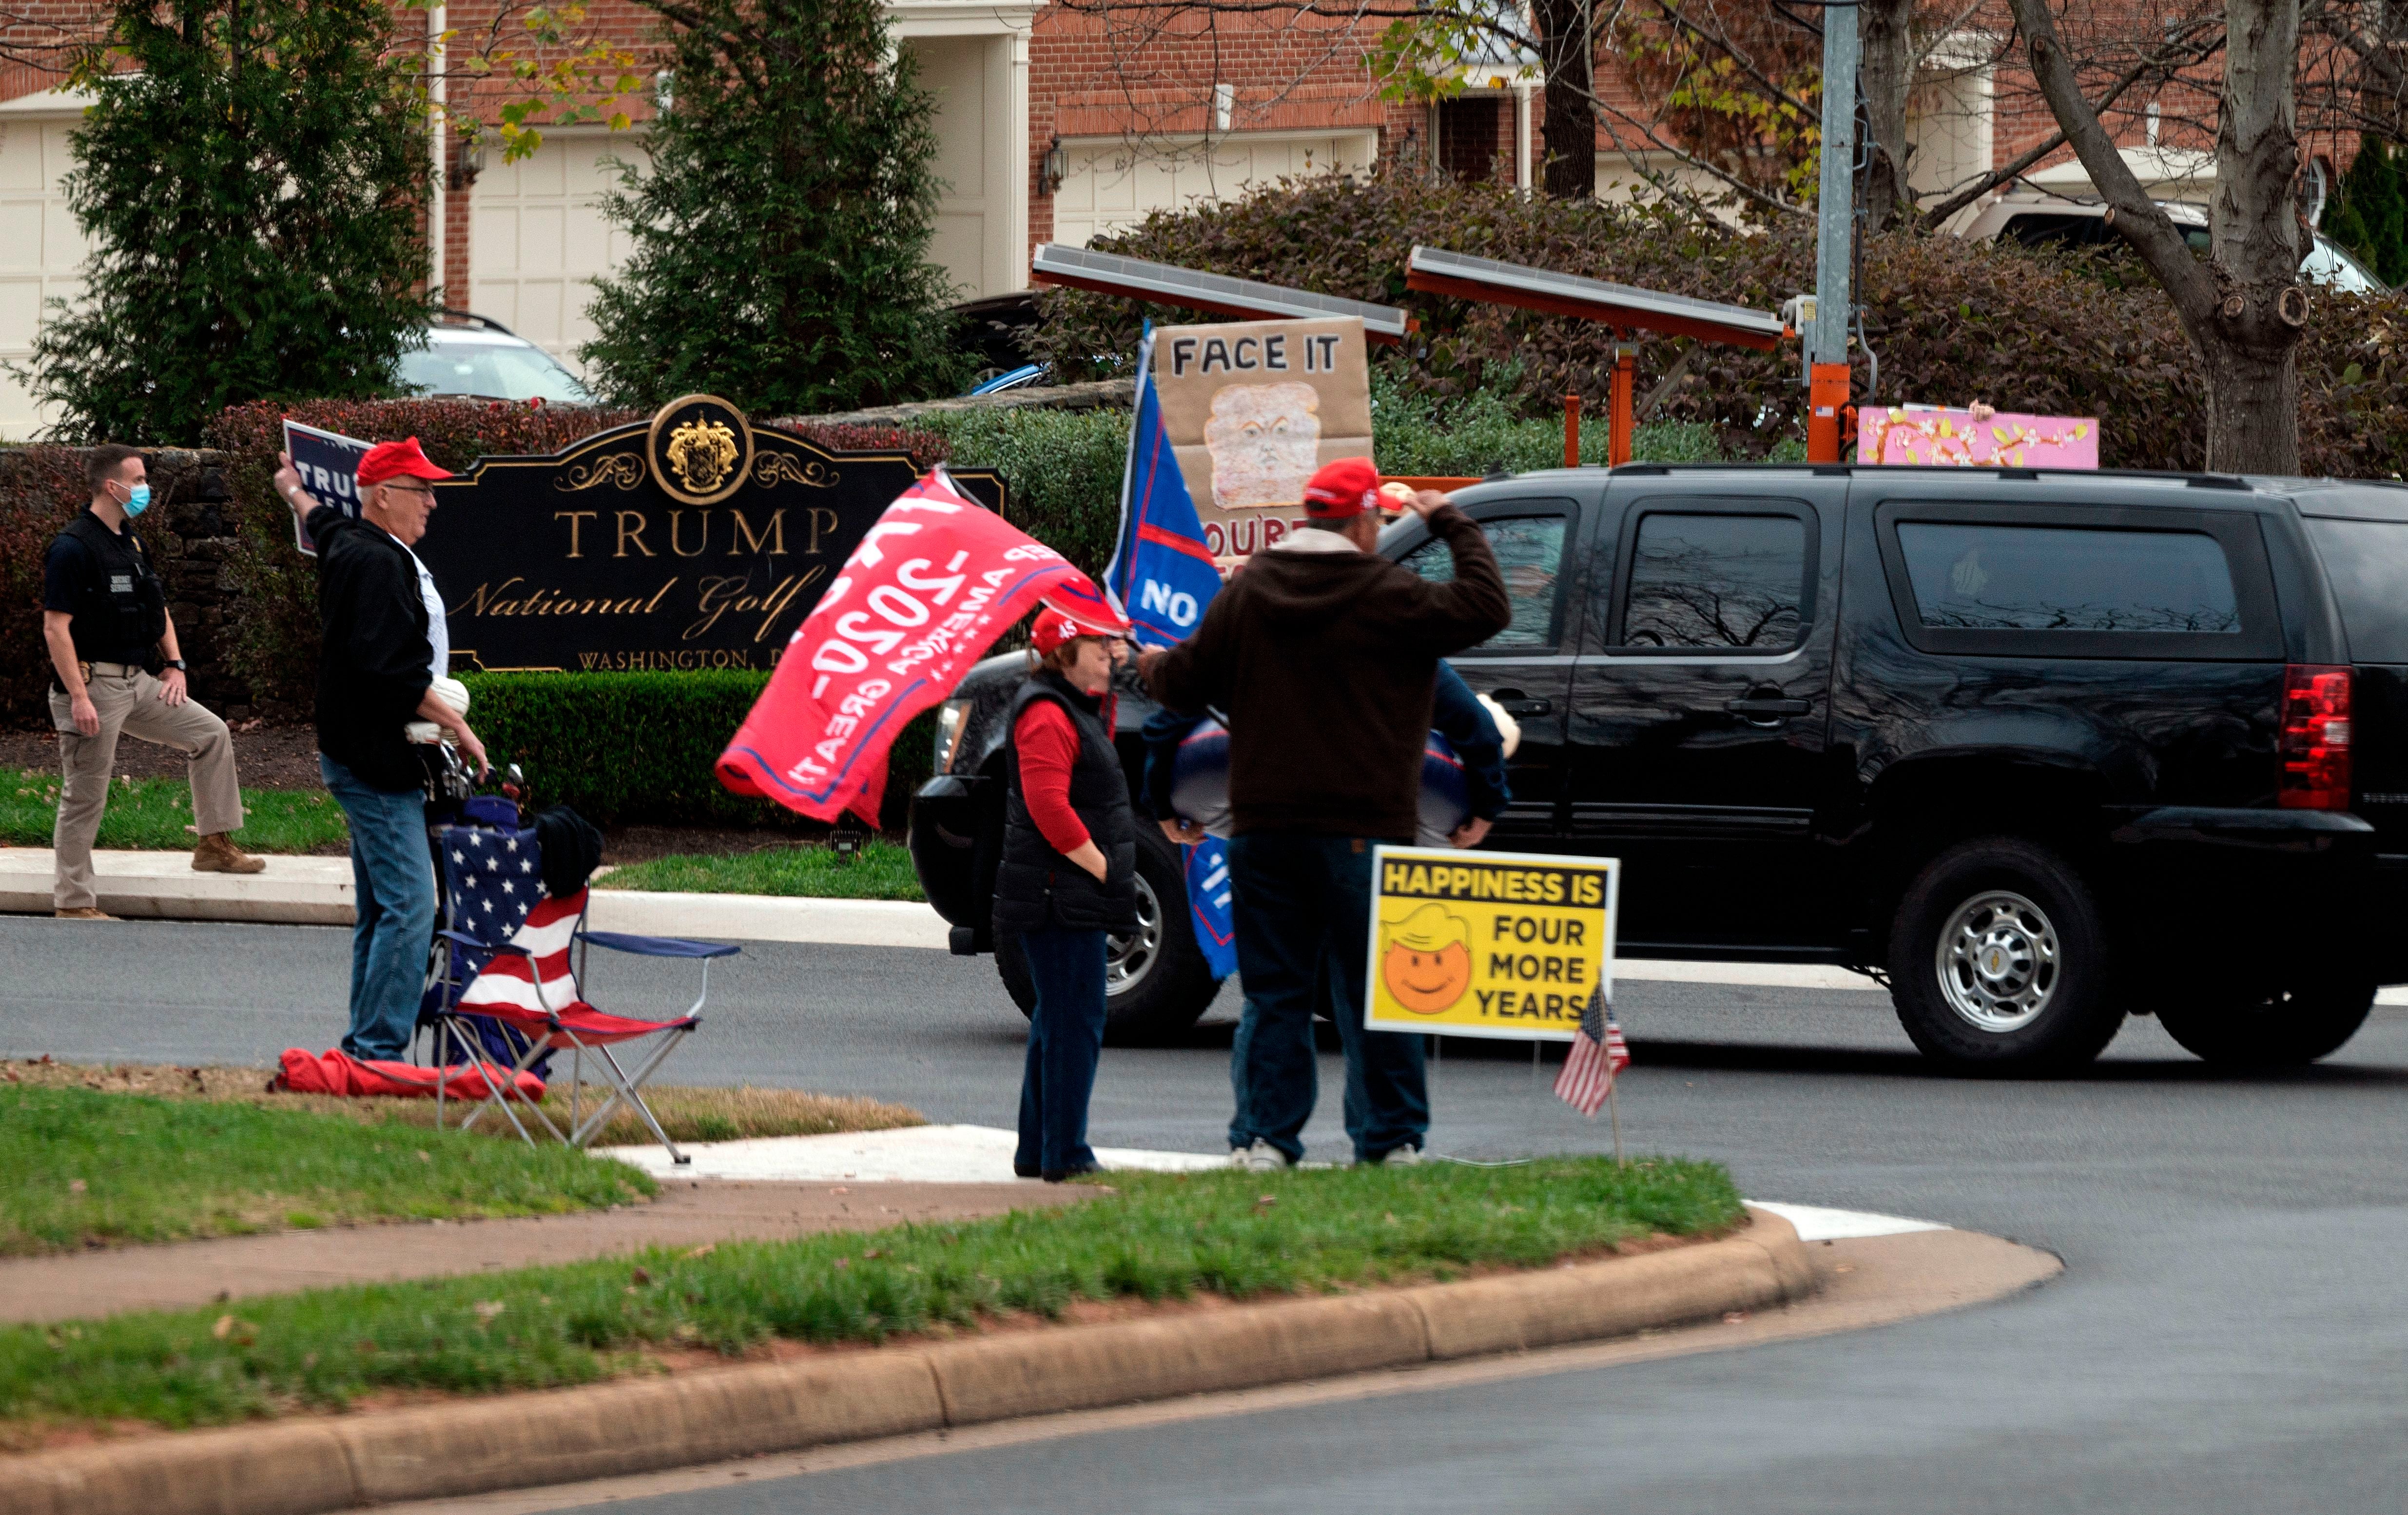 Supporters cheer as President Trump’s motorcade entered the Trump International Golf Club in Sterling, Virginia